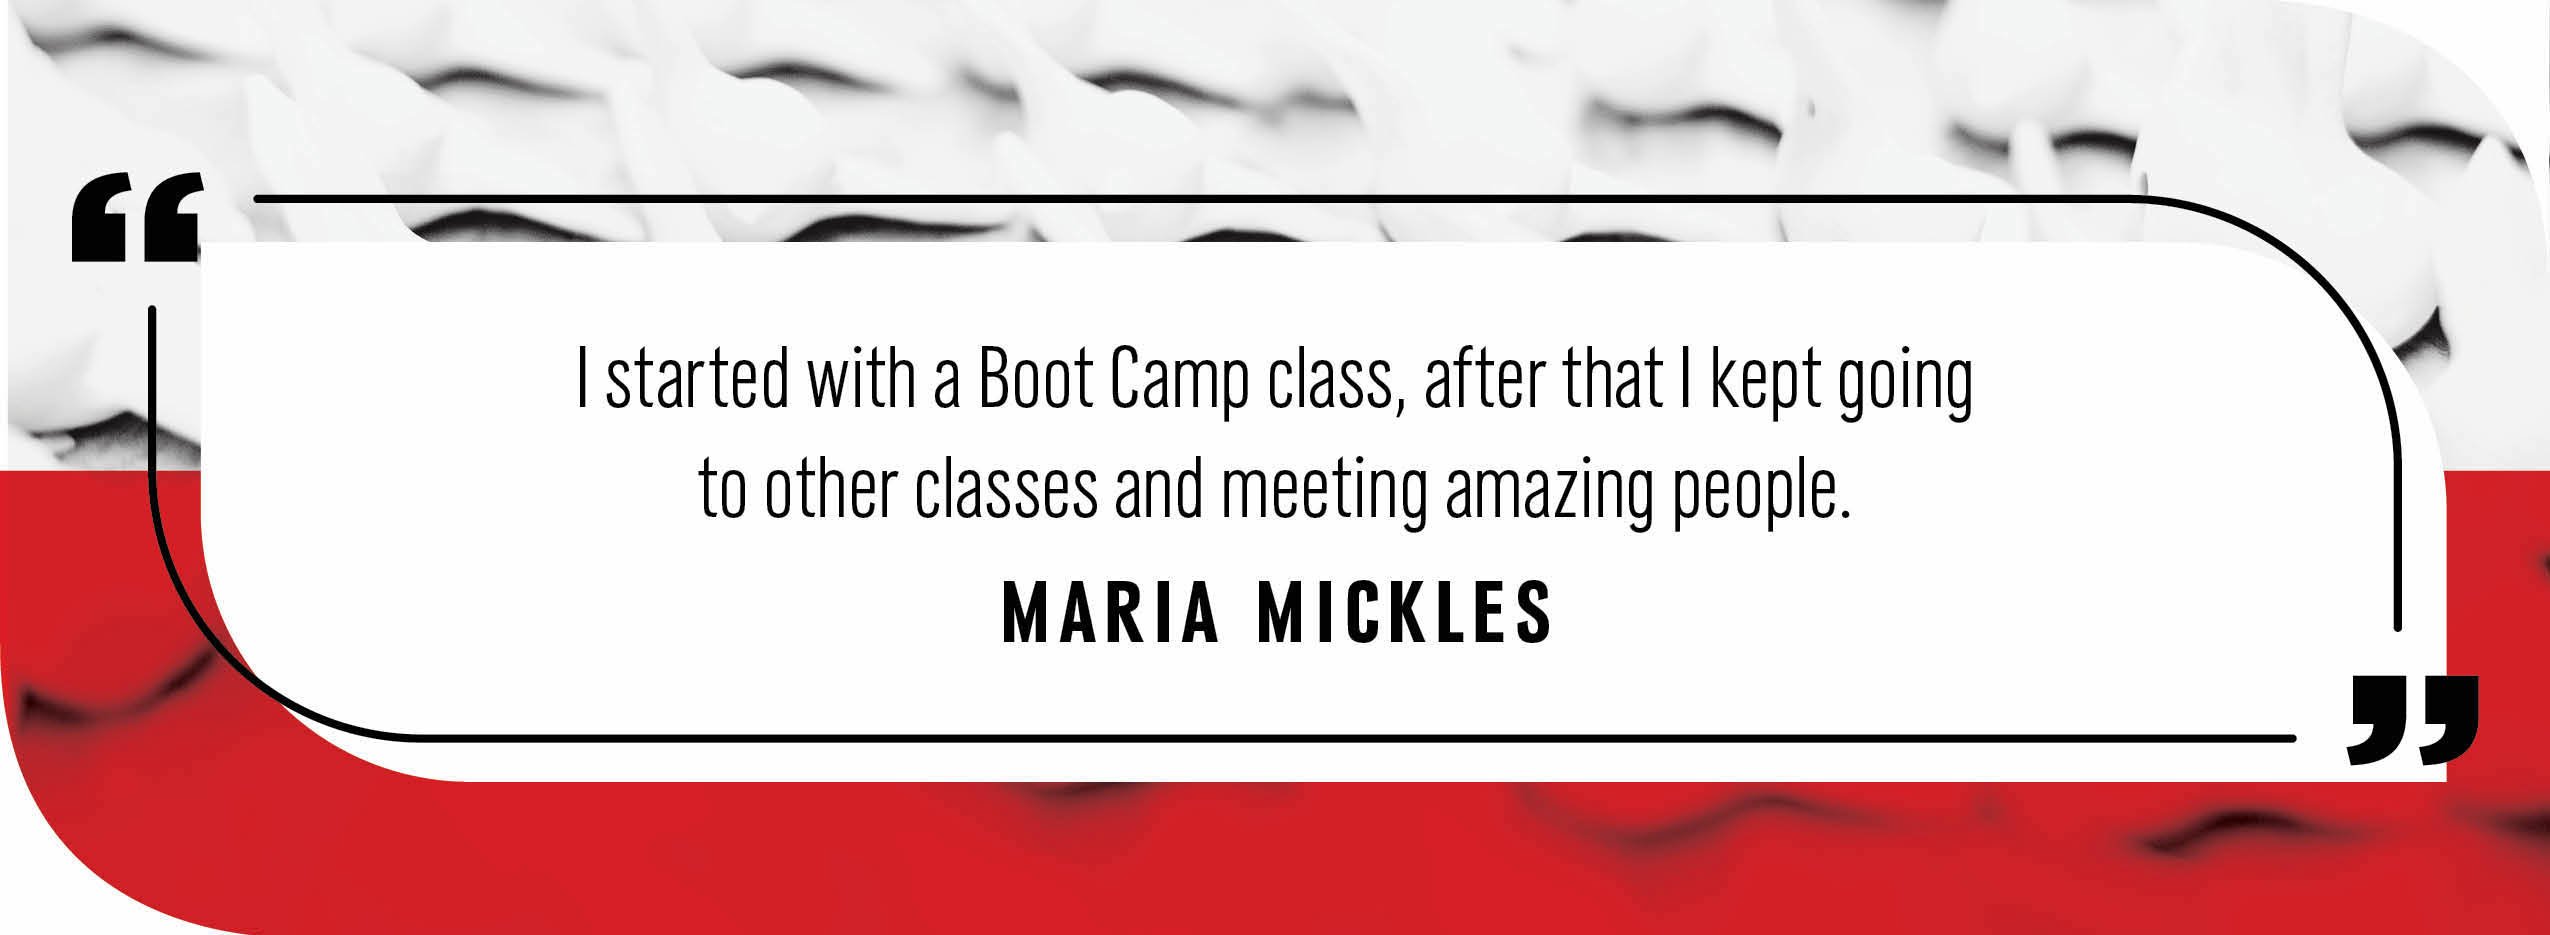 Quote by Maria Mickles: "I started with a Boot Camp, after that I kept going to other classes and meeting amazing people."